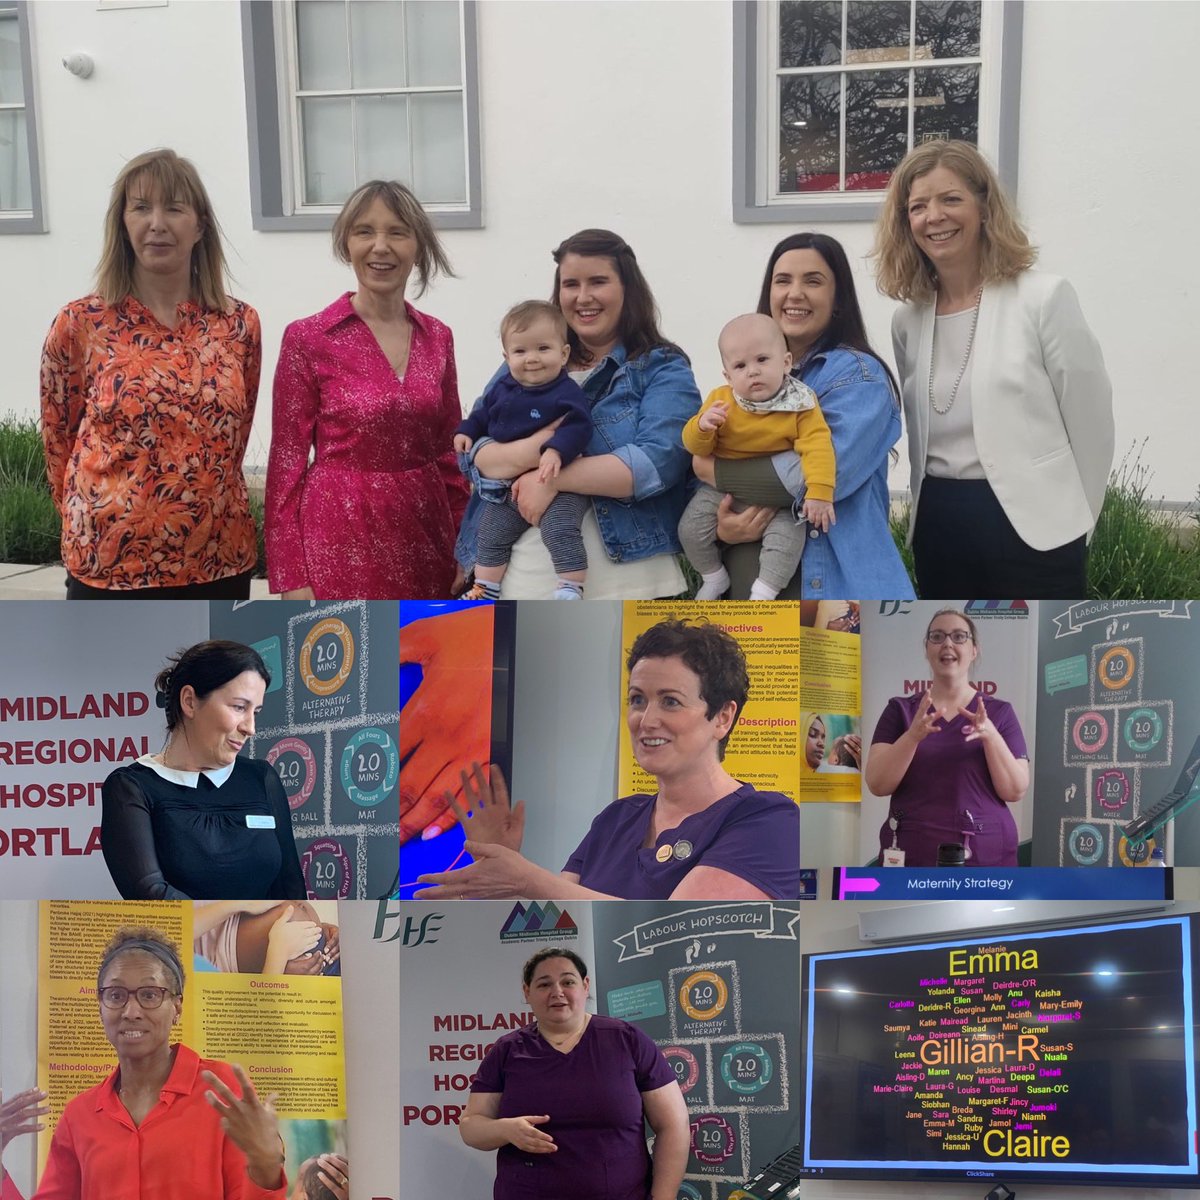 Celebrating #IDM2023 with Director of Midwifery Ita Kinsella, colleagues, mothers & beautiful babies in #MRHPortlaoise today. Superb presentations by passionate midwives who have huge pride in their work & a strong vision for midwifery led care in the midlands @DMHospitalGroup